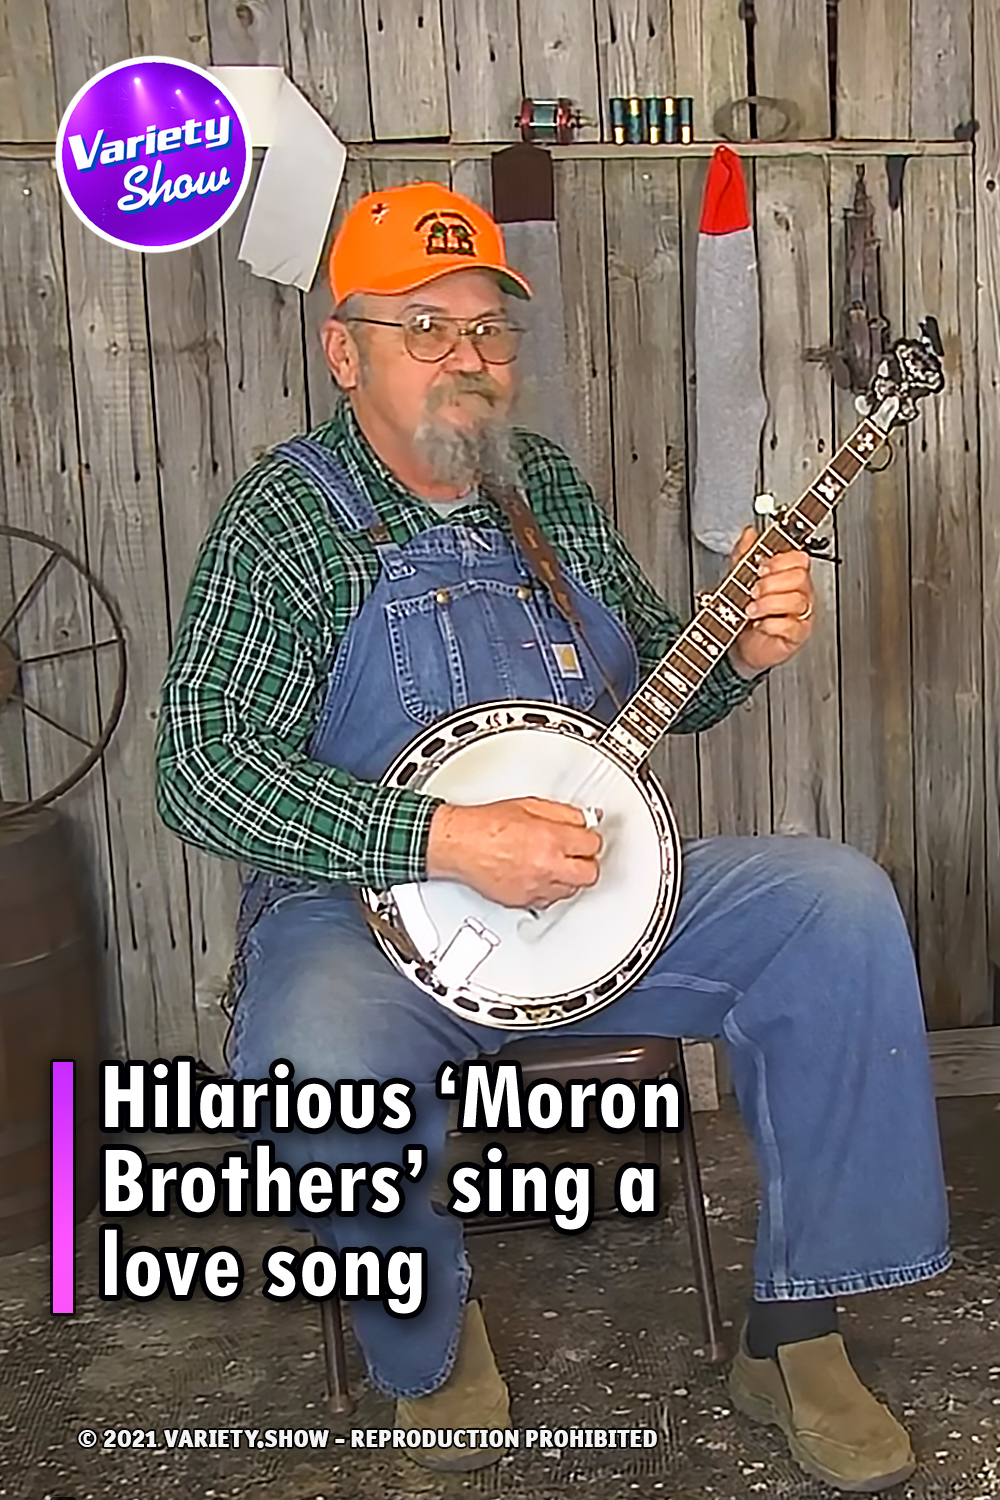 Hilarious ‘Moron Brothers’ sing a love song